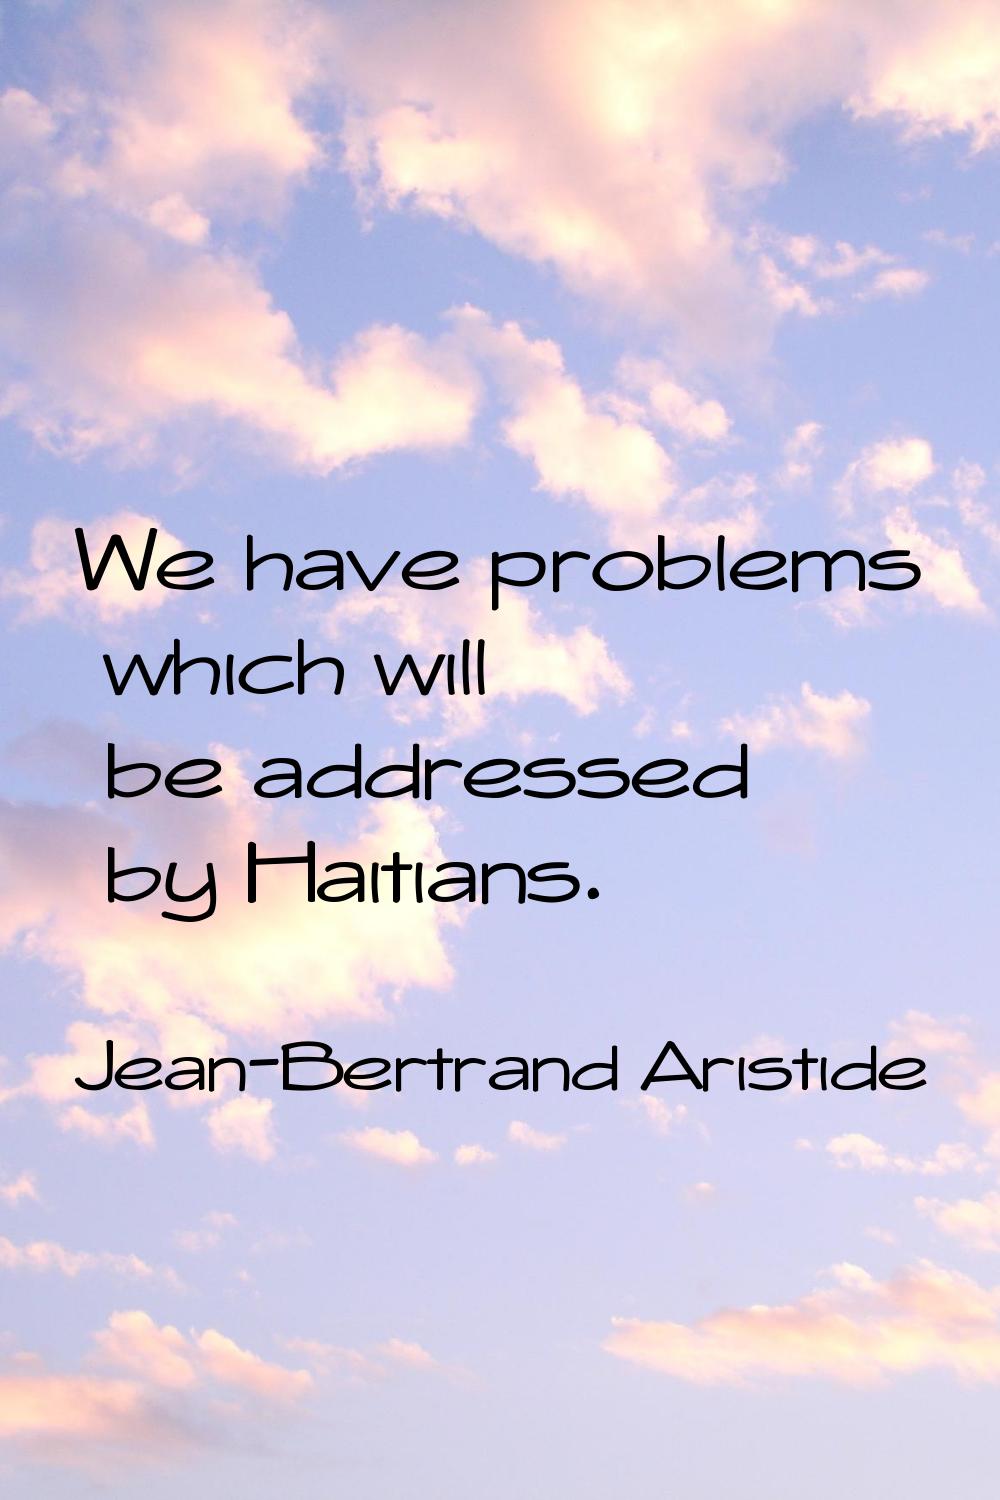 We have problems which will be addressed by Haitians.